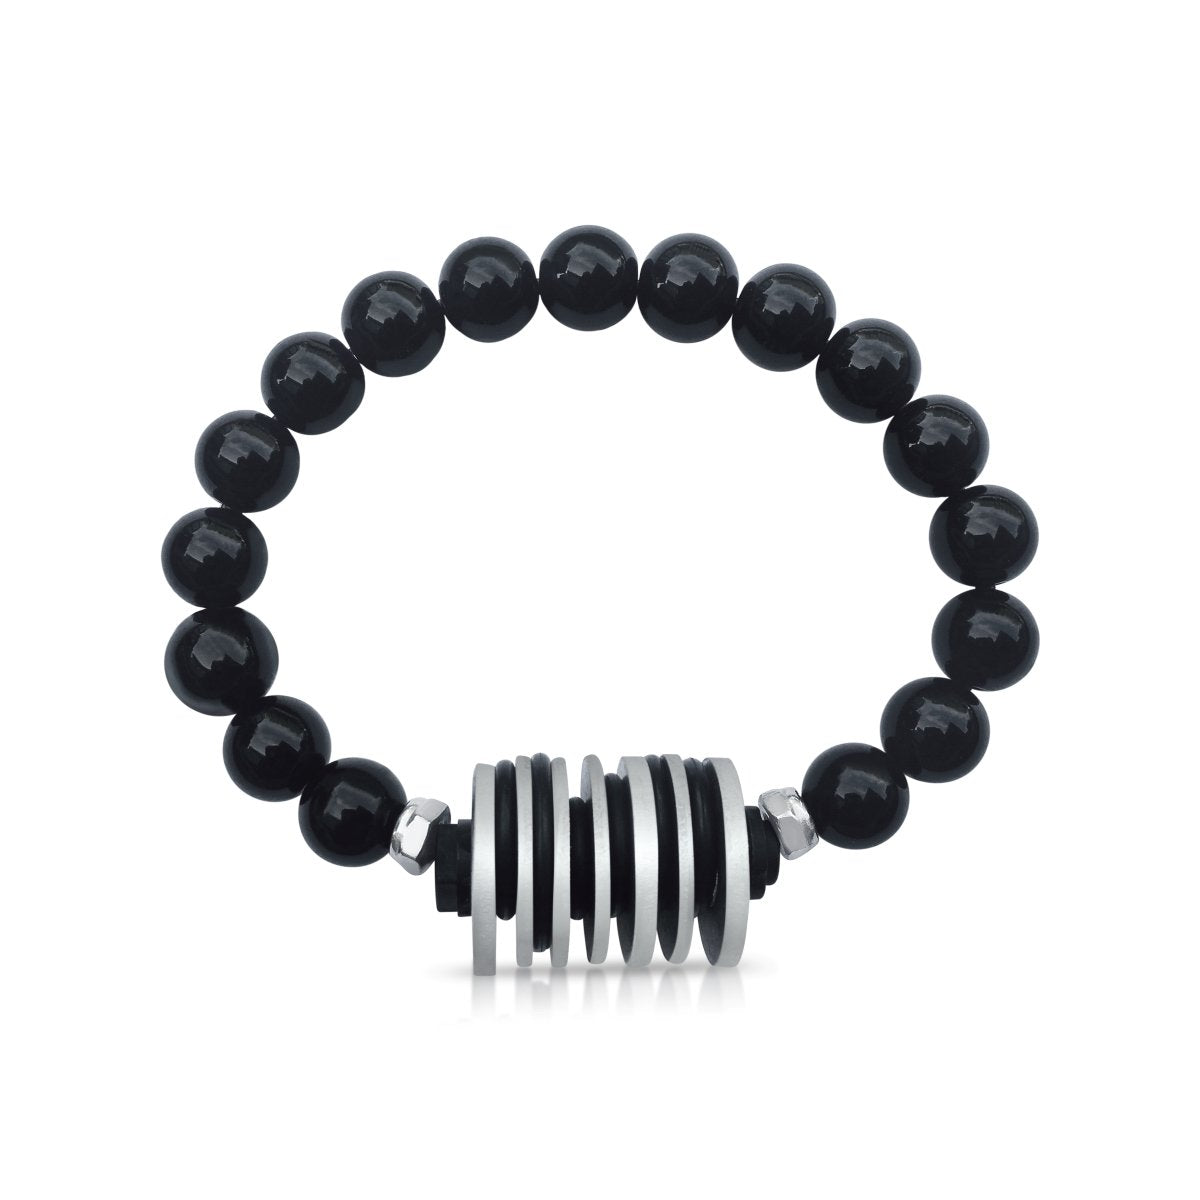 Zero Waste Bracelet with up-recycled SCUBA parts and Onyx  